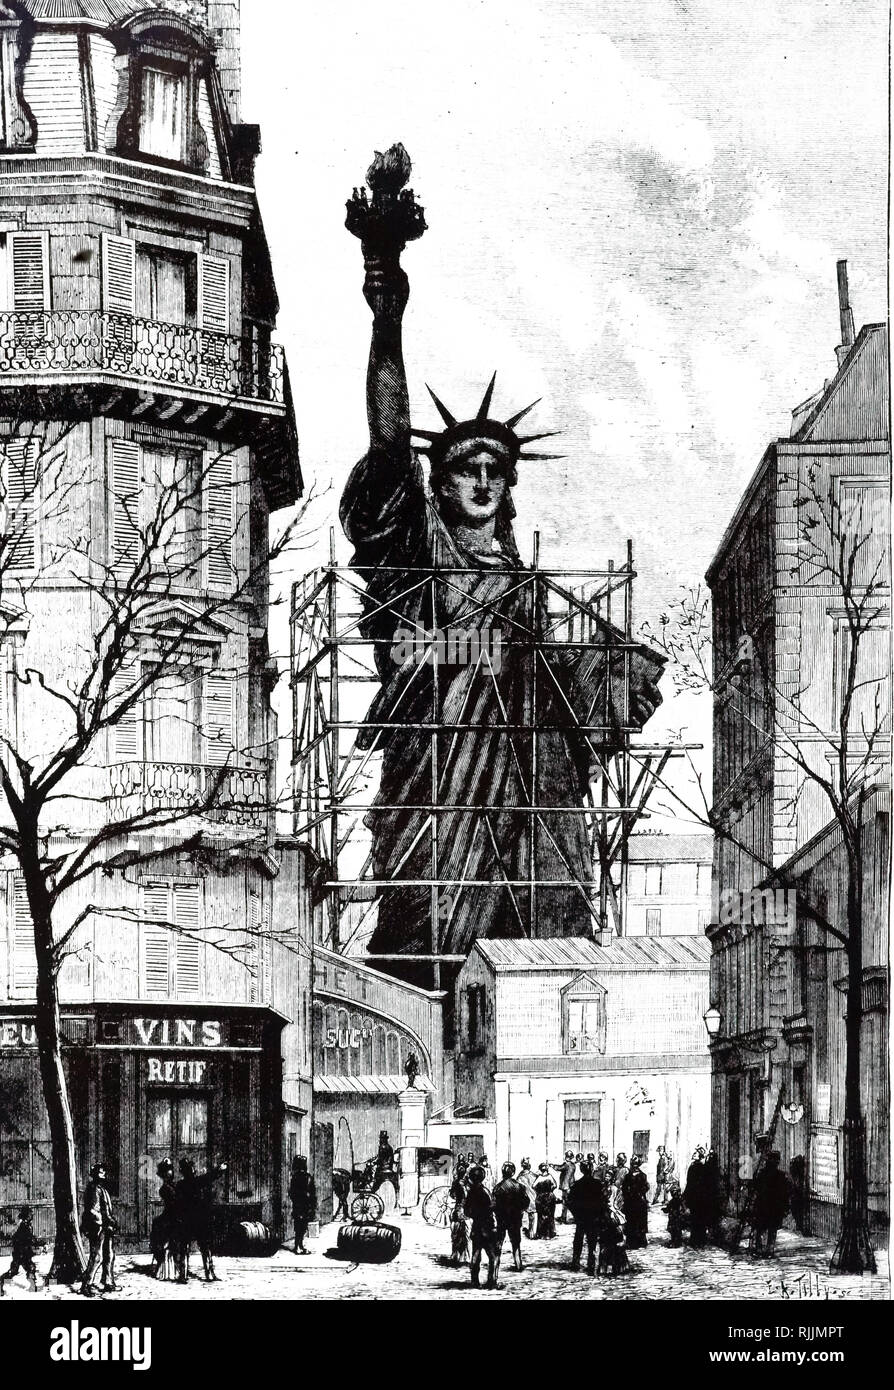 An engraving depicting the construction of the Statue Of Liberty France, designed by French sculptor Frederic Auguste Bartholdi and built by Gustave Eiffel. The statue was dedicated to America on October 28, 1886. Dated 19th century Stock Photo